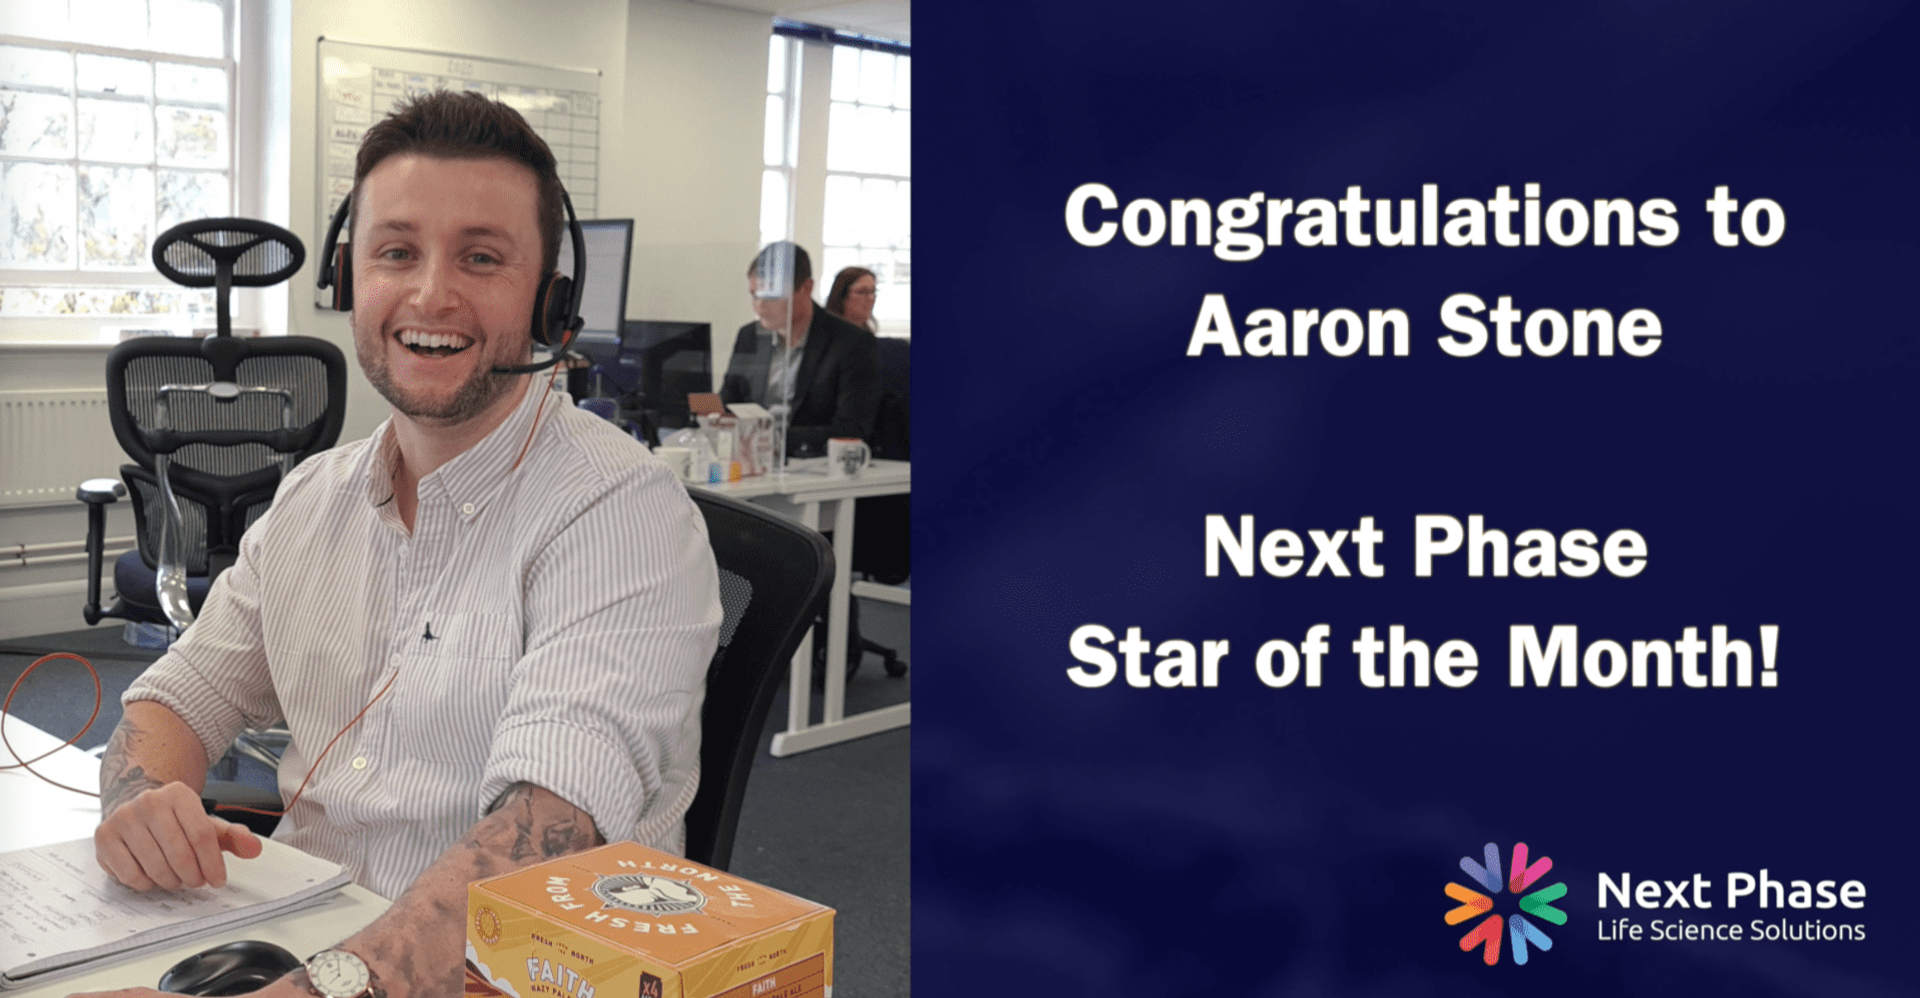 Aaron Stone joined Next Phase in 2021 and has over 5 years' recruitment experience and specialises in placing people at all levels in a variety of technical and scientific positions. 